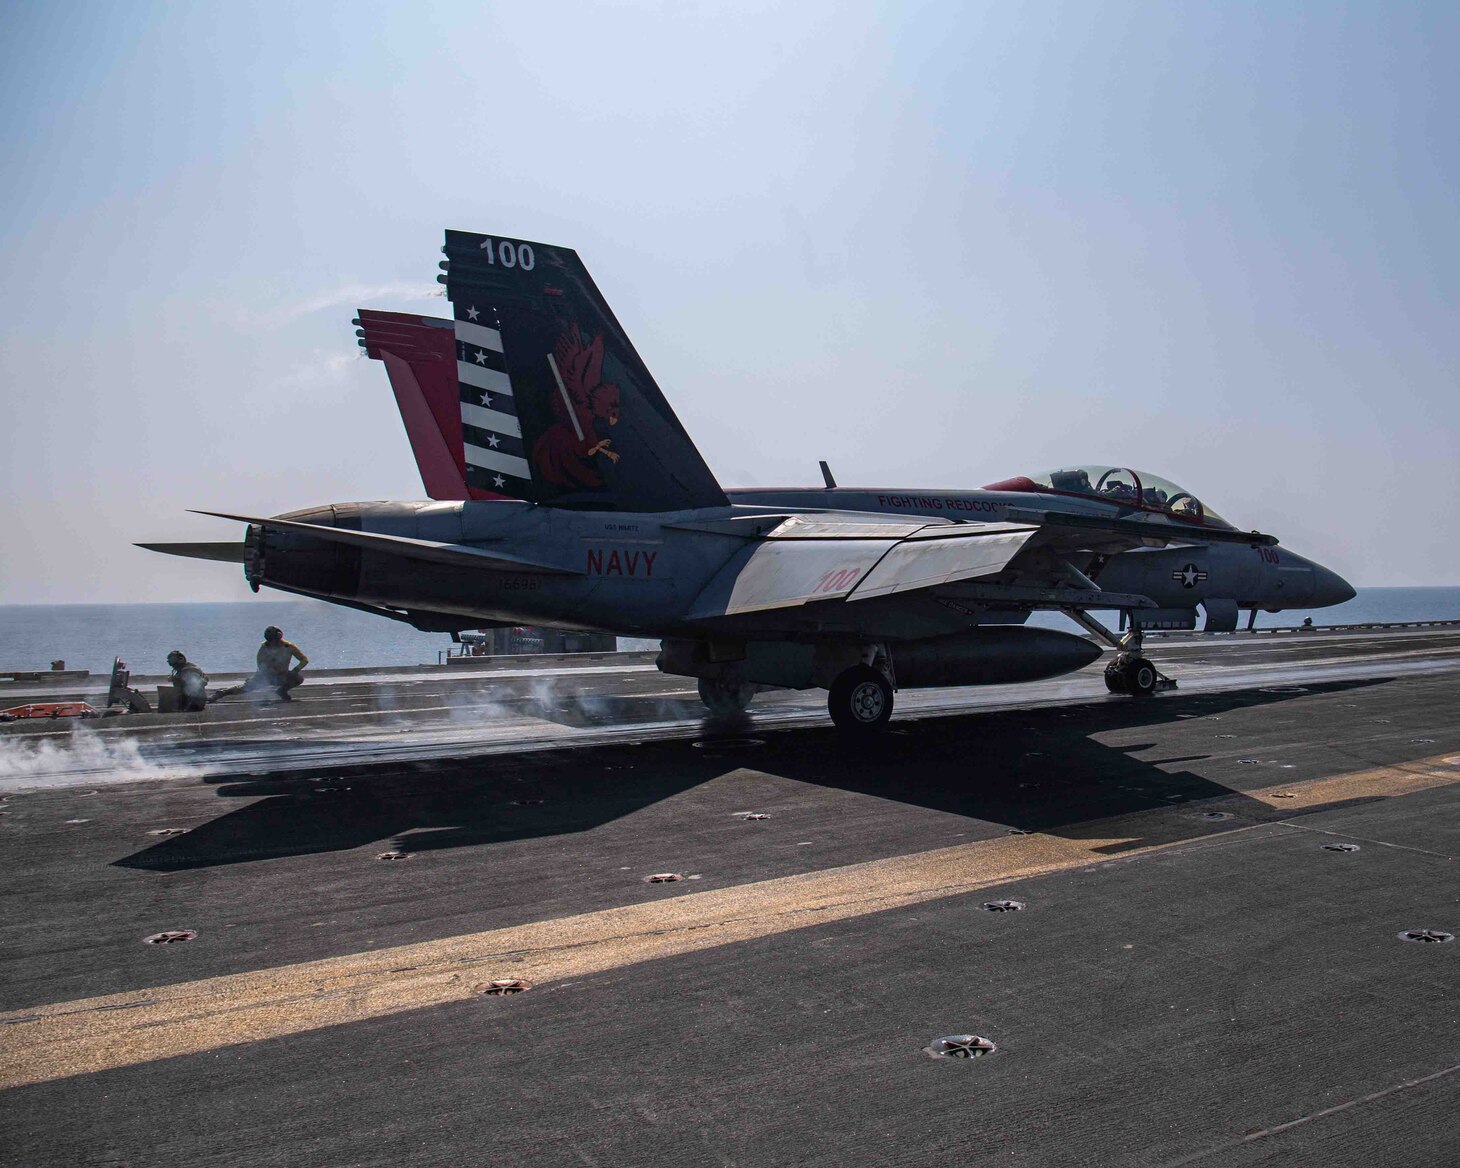 U.S. Navy Capt. Craig Sicola, commanding officer of the aircraft carrier USS Nimitz (CVN 68), front seat, and Cmdr. Luke Edwards, commanding officer of the “Fighting Redcocks” of Strike Fighter Squadron (VFA) 22, launch from the flight deck of Nimitz in an F/A-18F Super Hornet from VFA-22. Nimitz is in U.S. 7th Fleet conducting routine operations. 7th Fleet is the U.S. Navy's largest forward-deployed numbered fleet, and routinely interacts and operates with allies and partners in preserving a free and open Indo-Pacific region. (U.S. Navy photo by Mass Communication Specialist 2nd Class Joseph Calabrese)